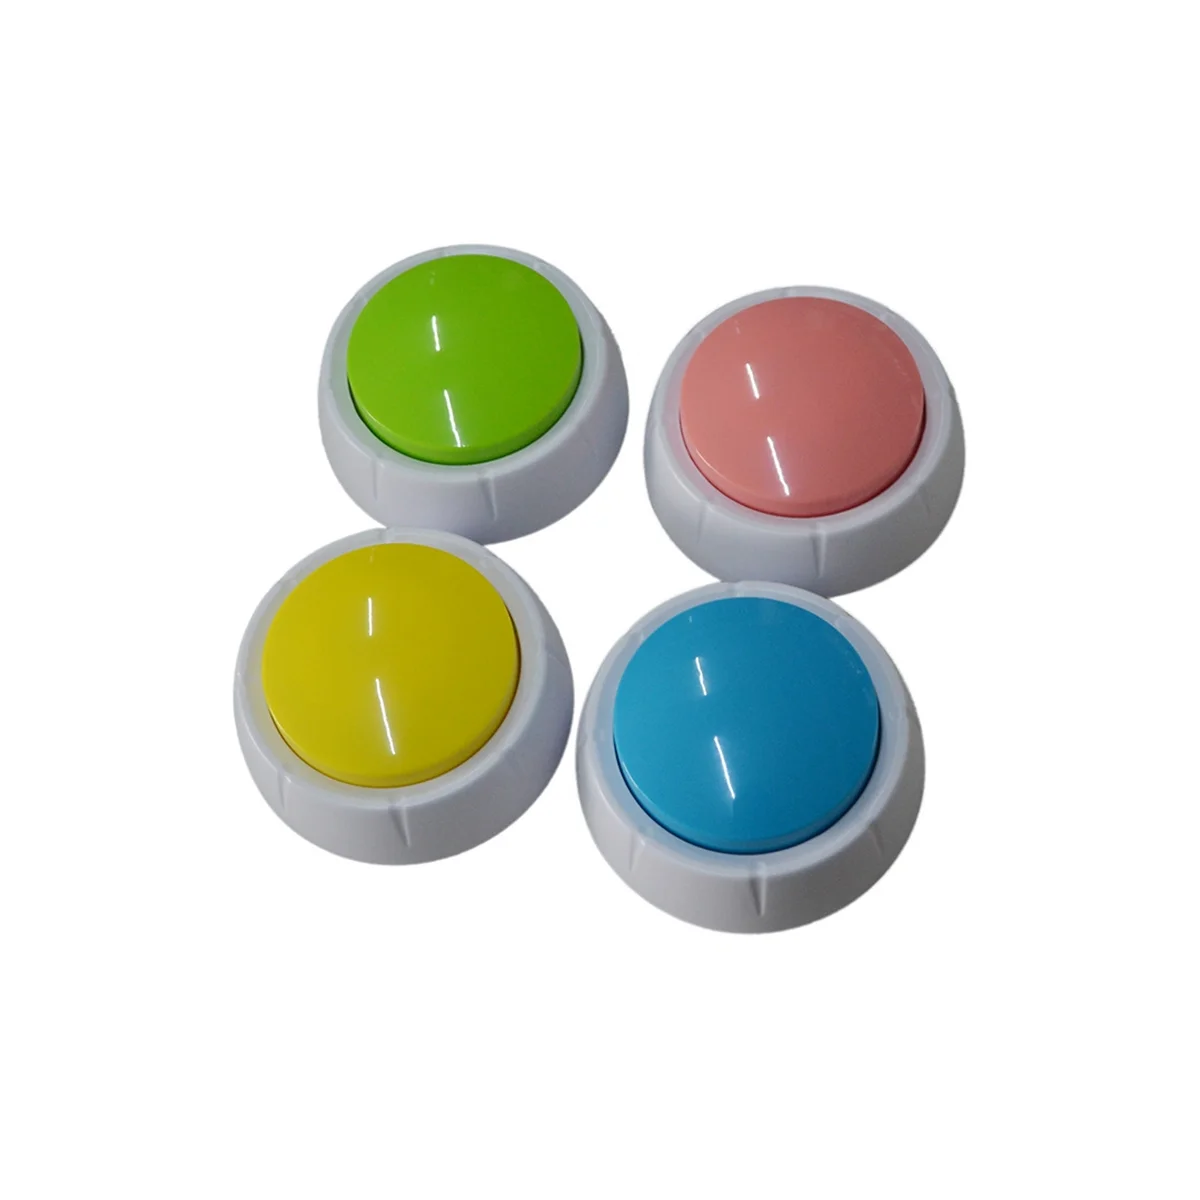 Squeeze Sound Box Music Box Recordable Voice Sound Button Party Supplies Communication Buttons Buzzer Sounding Box Green